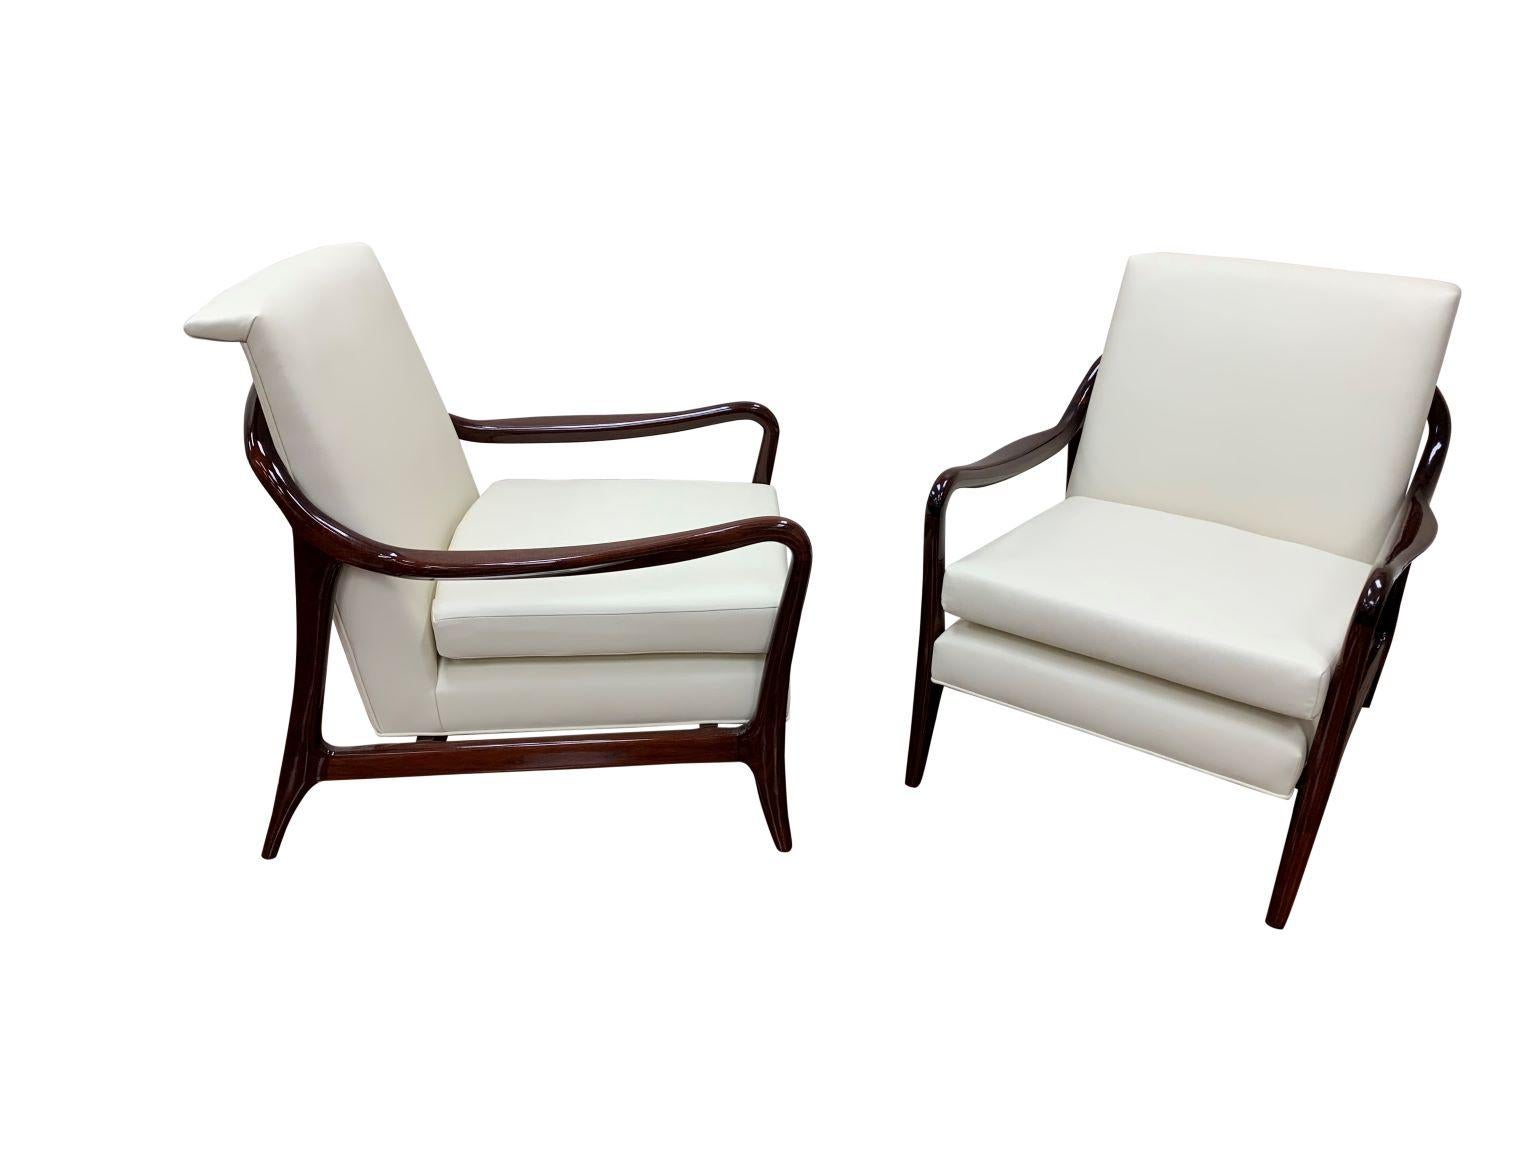 Professionally restored luxurious pair of large scale lounge chairs. Crafted with solid walnut in a high polished finished. Perfectly complimented with a new soft cream upholstery. This particular example I have never seen in my thirty five years of